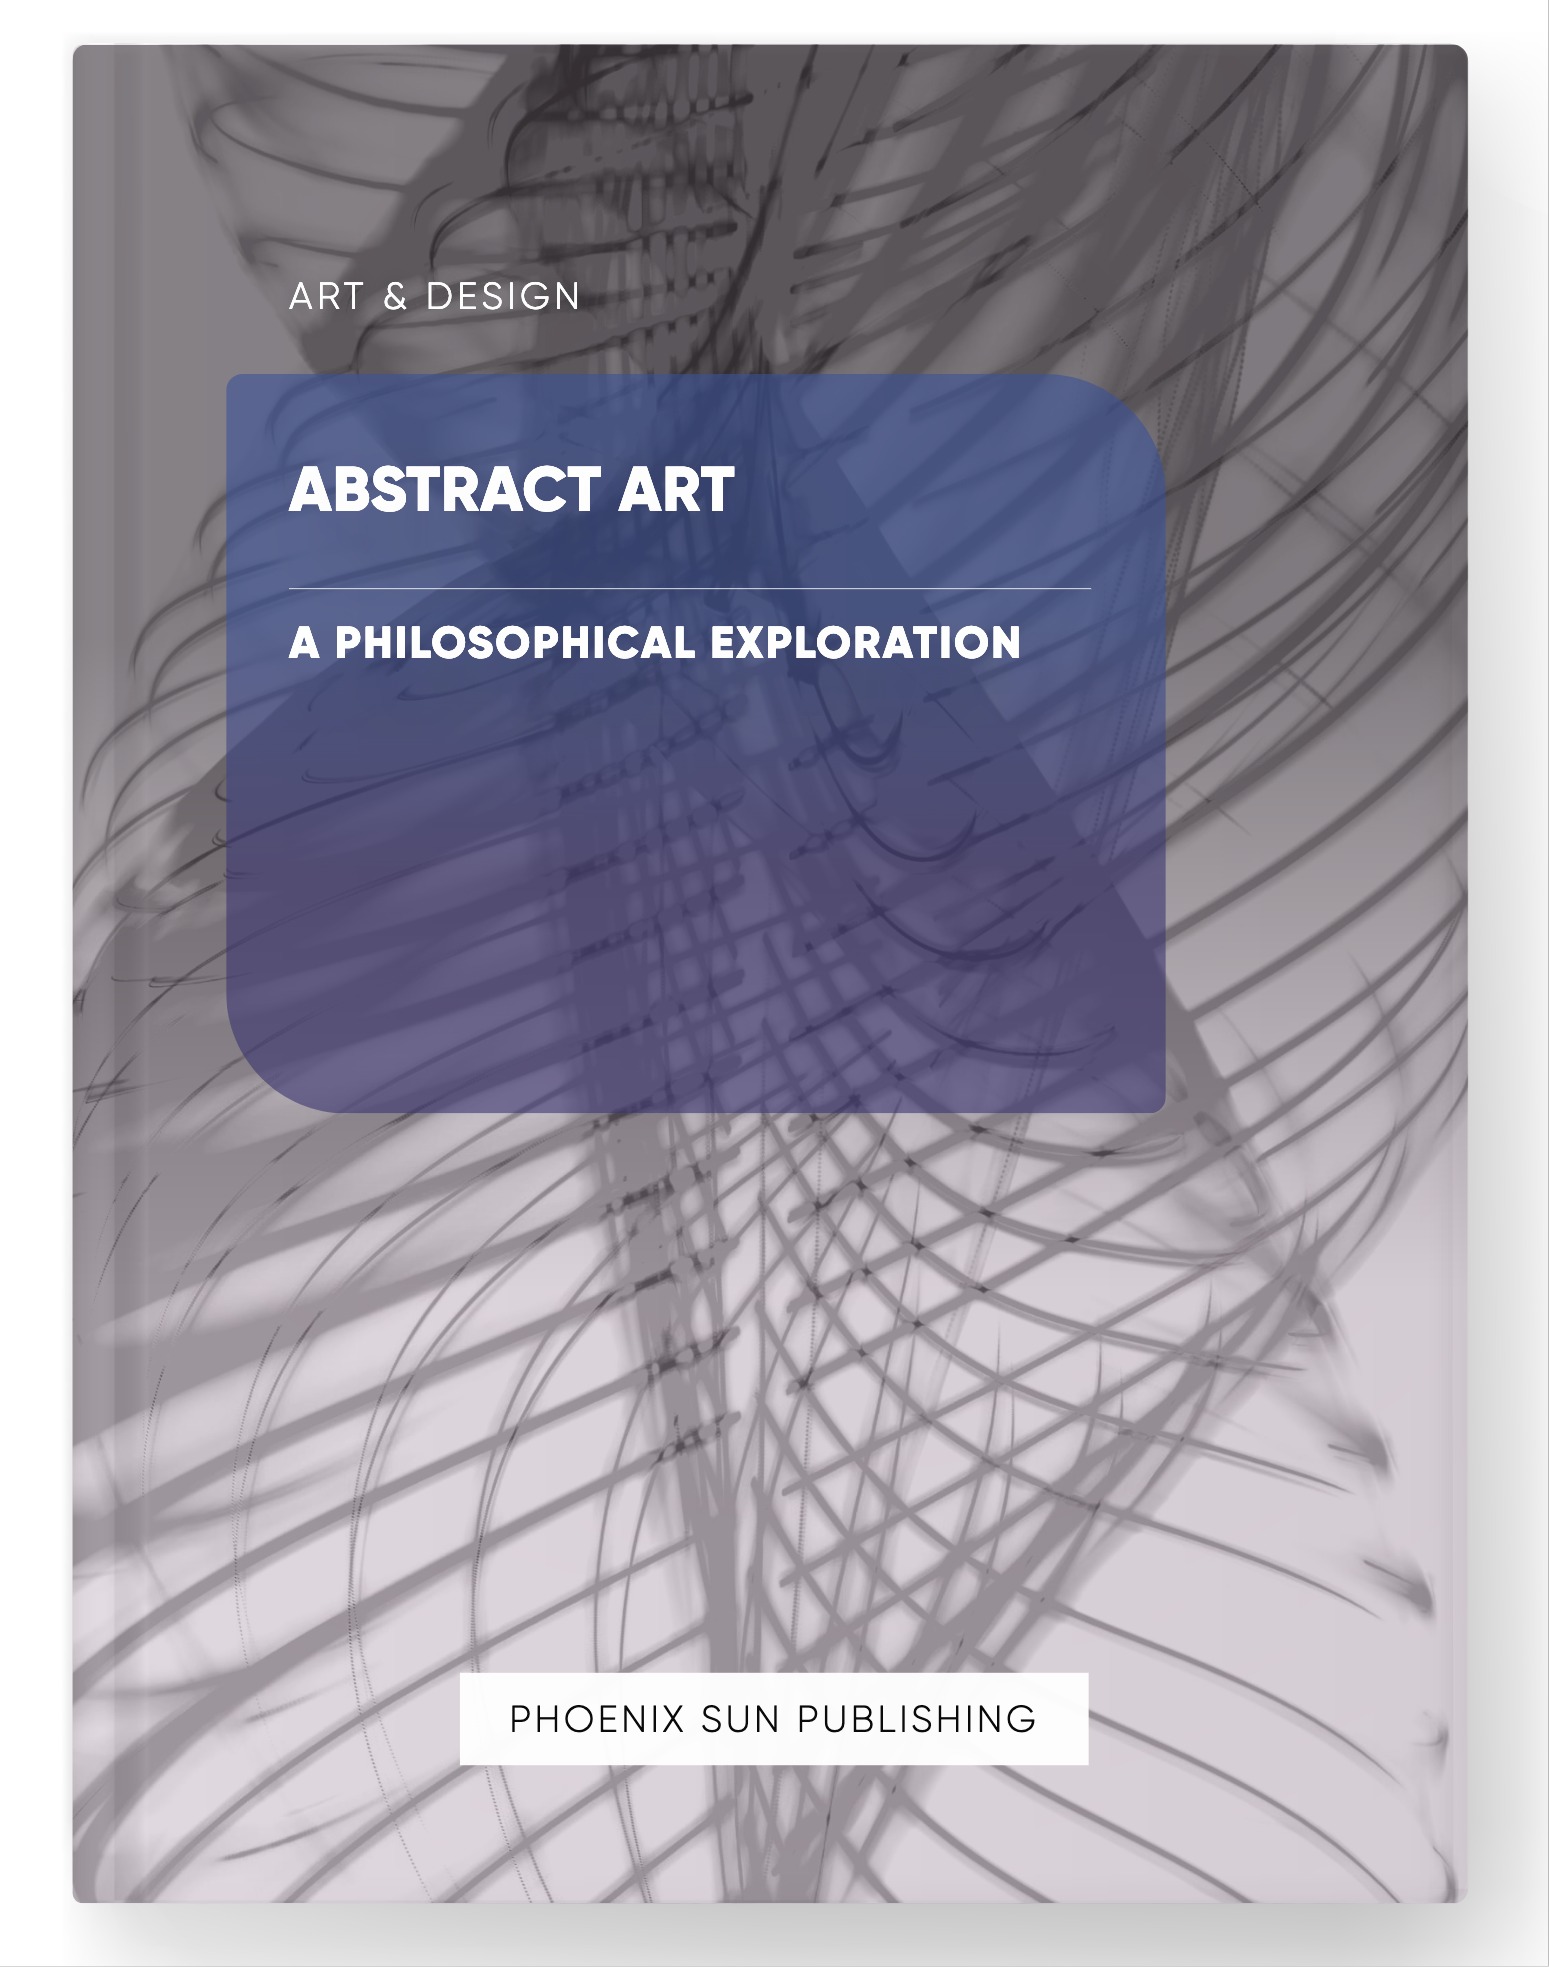 Abstract Art – A Philosophical Exploration